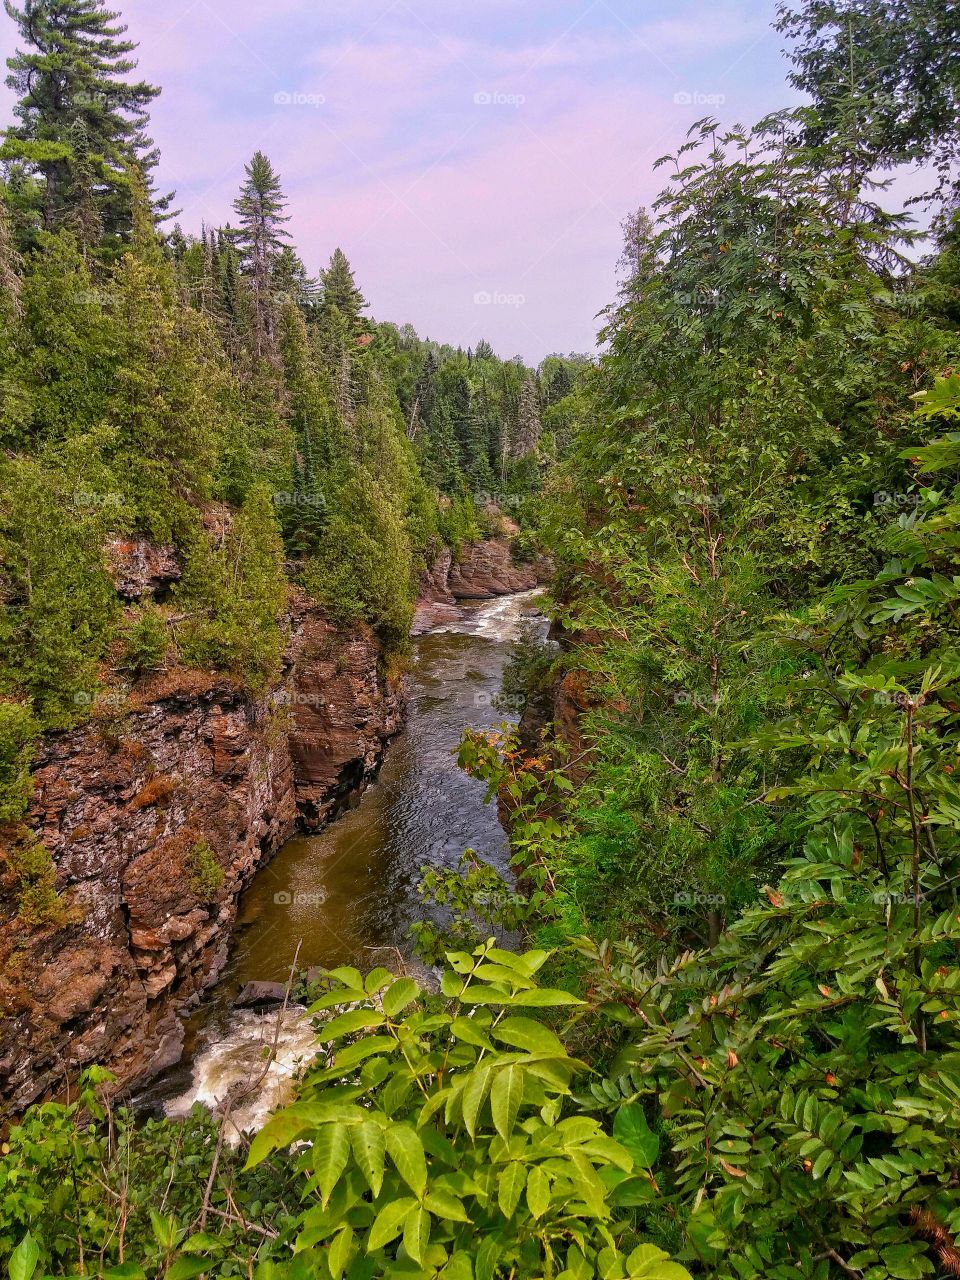 River on Border of Canada and Minnesota. Canada is on the left, Minnesota on the right.